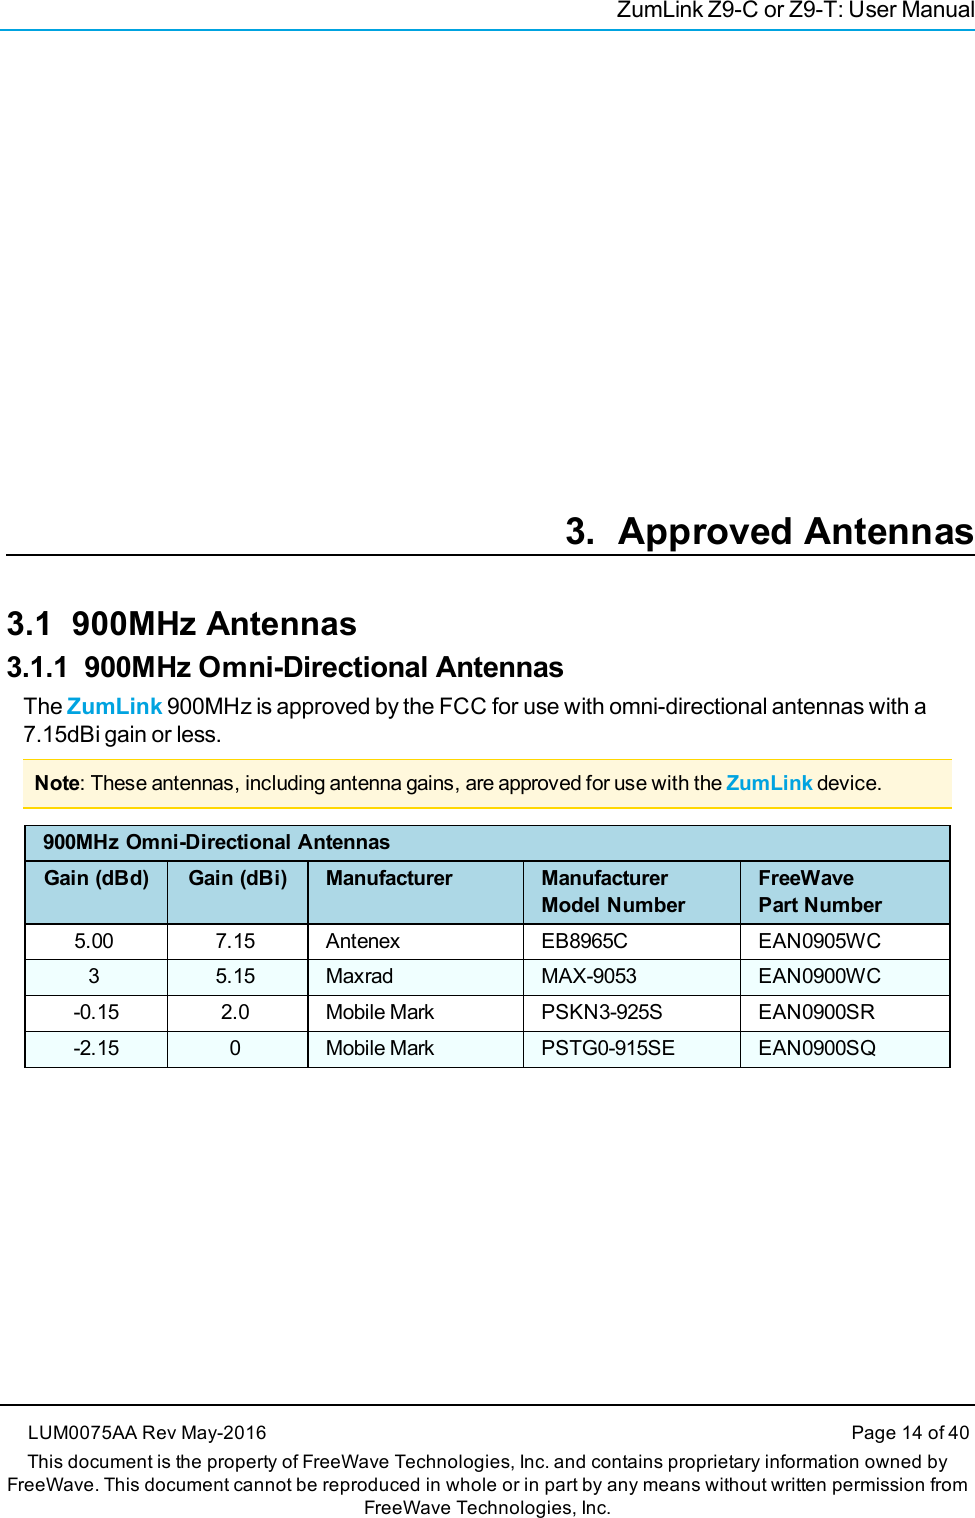 ZumLink Z9-C or Z9-T: User Manual3. Approved Antennas3.1 900MHz Antennas3.1.1 900MHz Omni-Directional AntennasThe ZumLink 900MHz is approved by the FCC for use with omni-directional antennas with a7.15dBi gain or less.Note: These antennas, including antenna gains, are approved for use with the ZumLink device.900MHz Omni-Directional AntennasGain (dBd) Gain (dBi) Manufacturer ManufacturerModel NumberFreeWavePart Number5.00 7.15 Antenex EB8965C EAN0905WC3 5.15 Maxrad MAX-9053 EAN0900WC-0.15 2.0 Mobile Mark PSKN3-925S EAN0900SR-2.15 0 Mobile Mark PSTG0-915SE EAN0900SQLUM0075AA Rev May-2016 Page 14 of 40This document is the property of FreeWave Technologies, Inc. and contains proprietary information owned byFreeWave. This document cannot be reproduced in whole or in part by any means without written permission fromFreeWave Technologies, Inc.